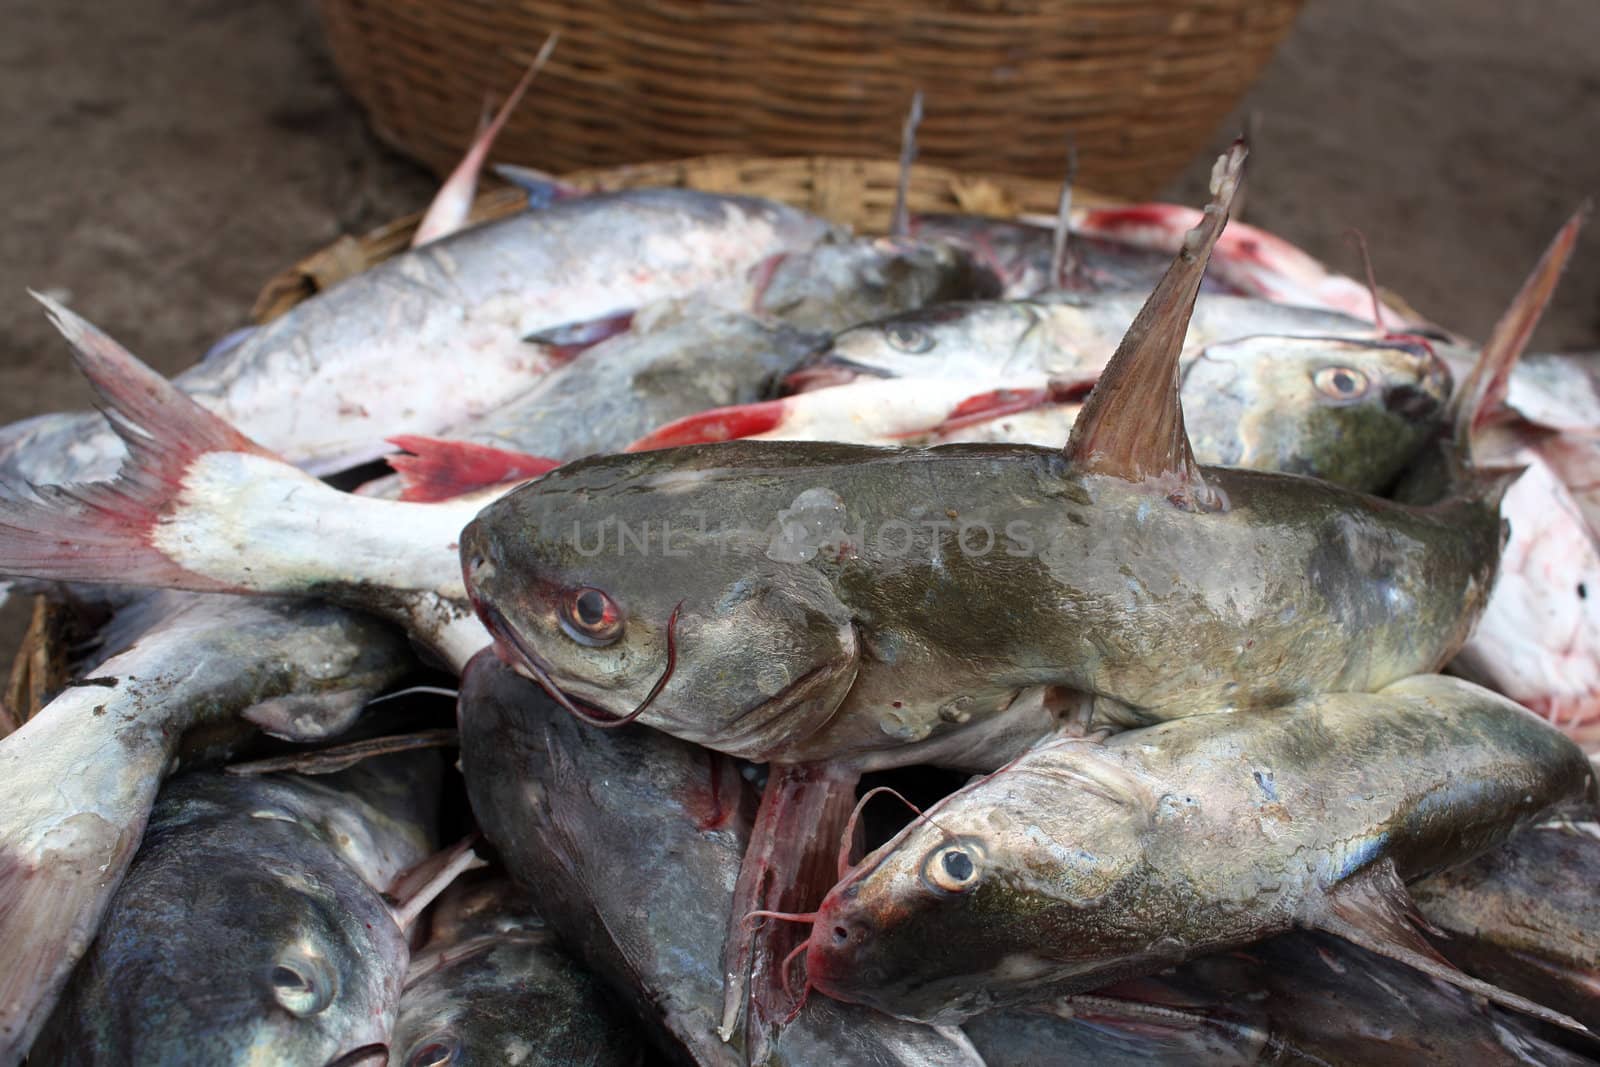 Baby sharks in a basket for sale in an Indian fish market.